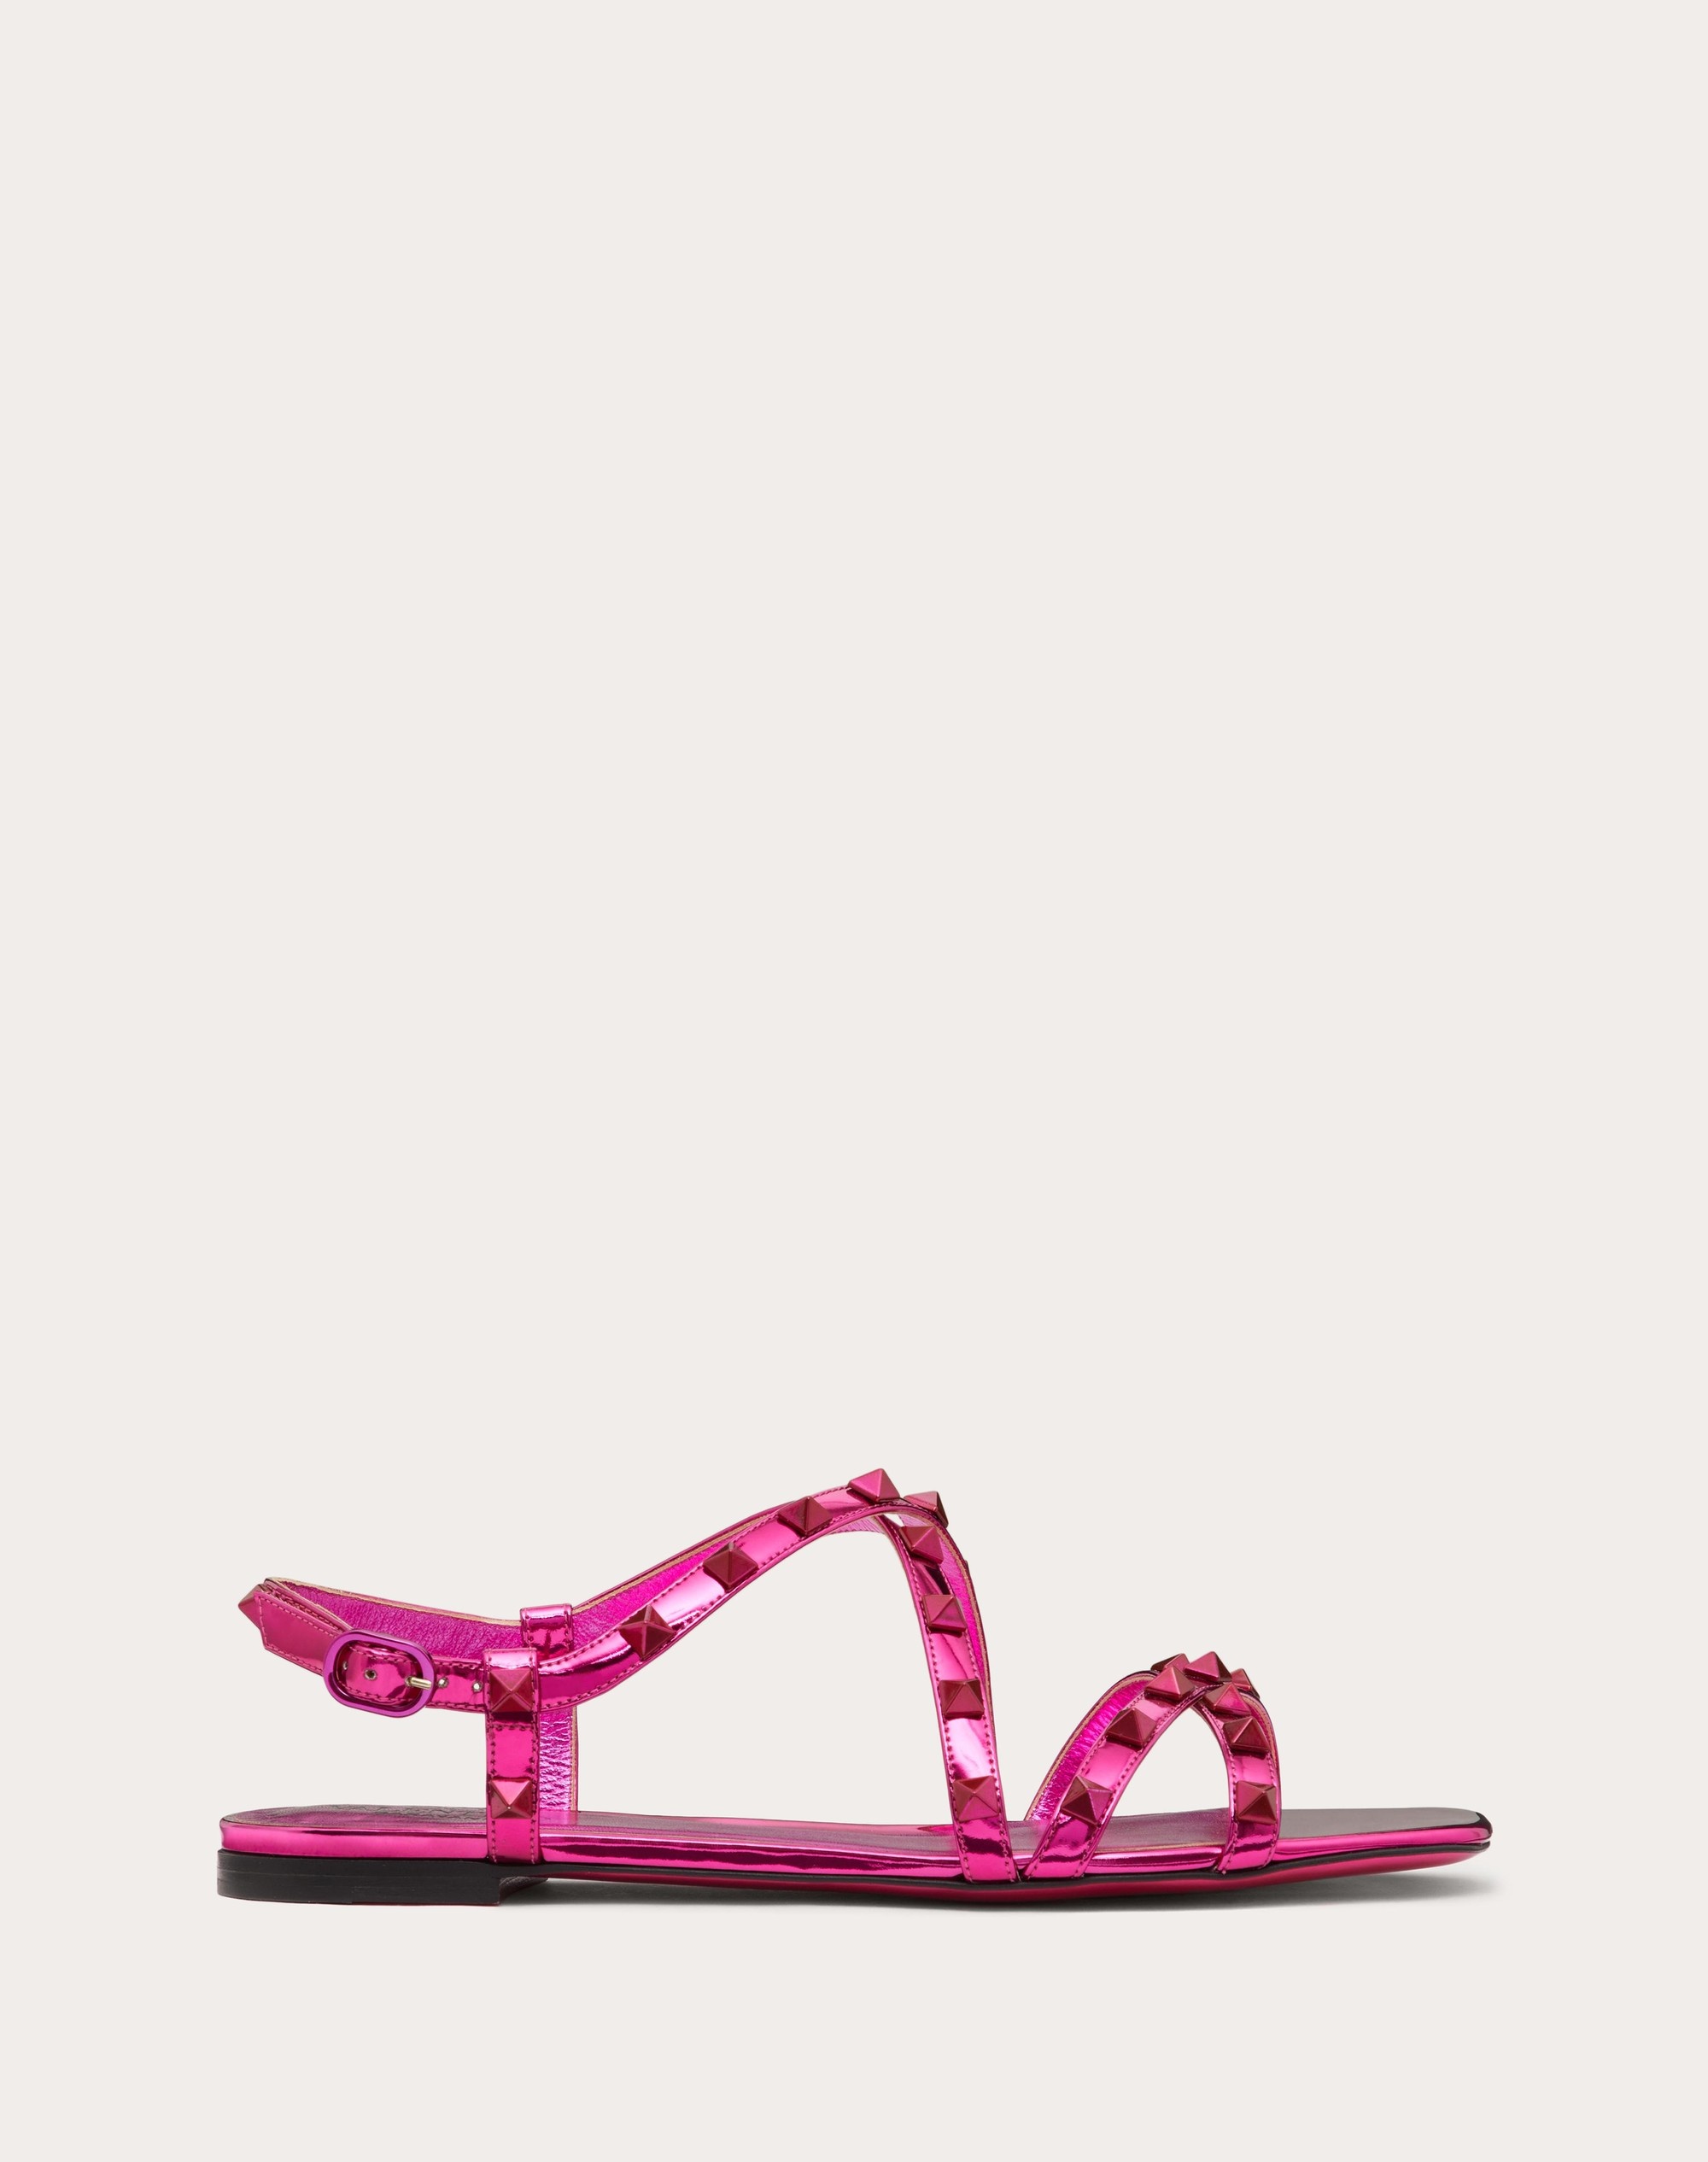 ROCKSTUD MIRROR-EFFECT SANDAL WITH MATCHING STUDS AND STRAPS - 1